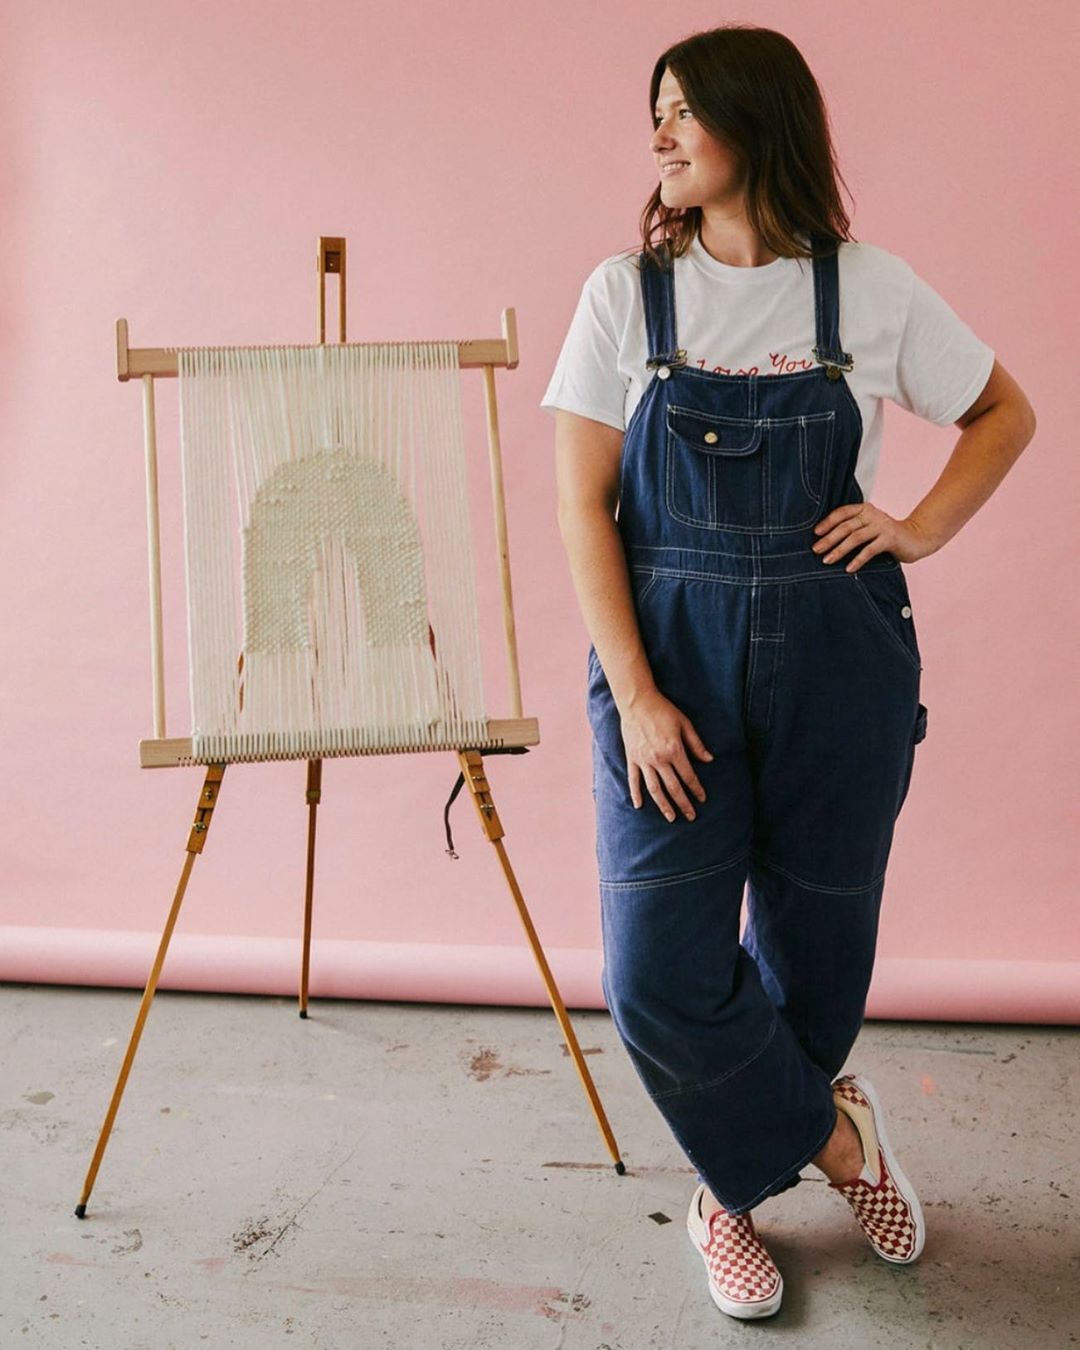 Rachel Wood wearing denim overalls and a white t-shirt posed next to her woven artwork